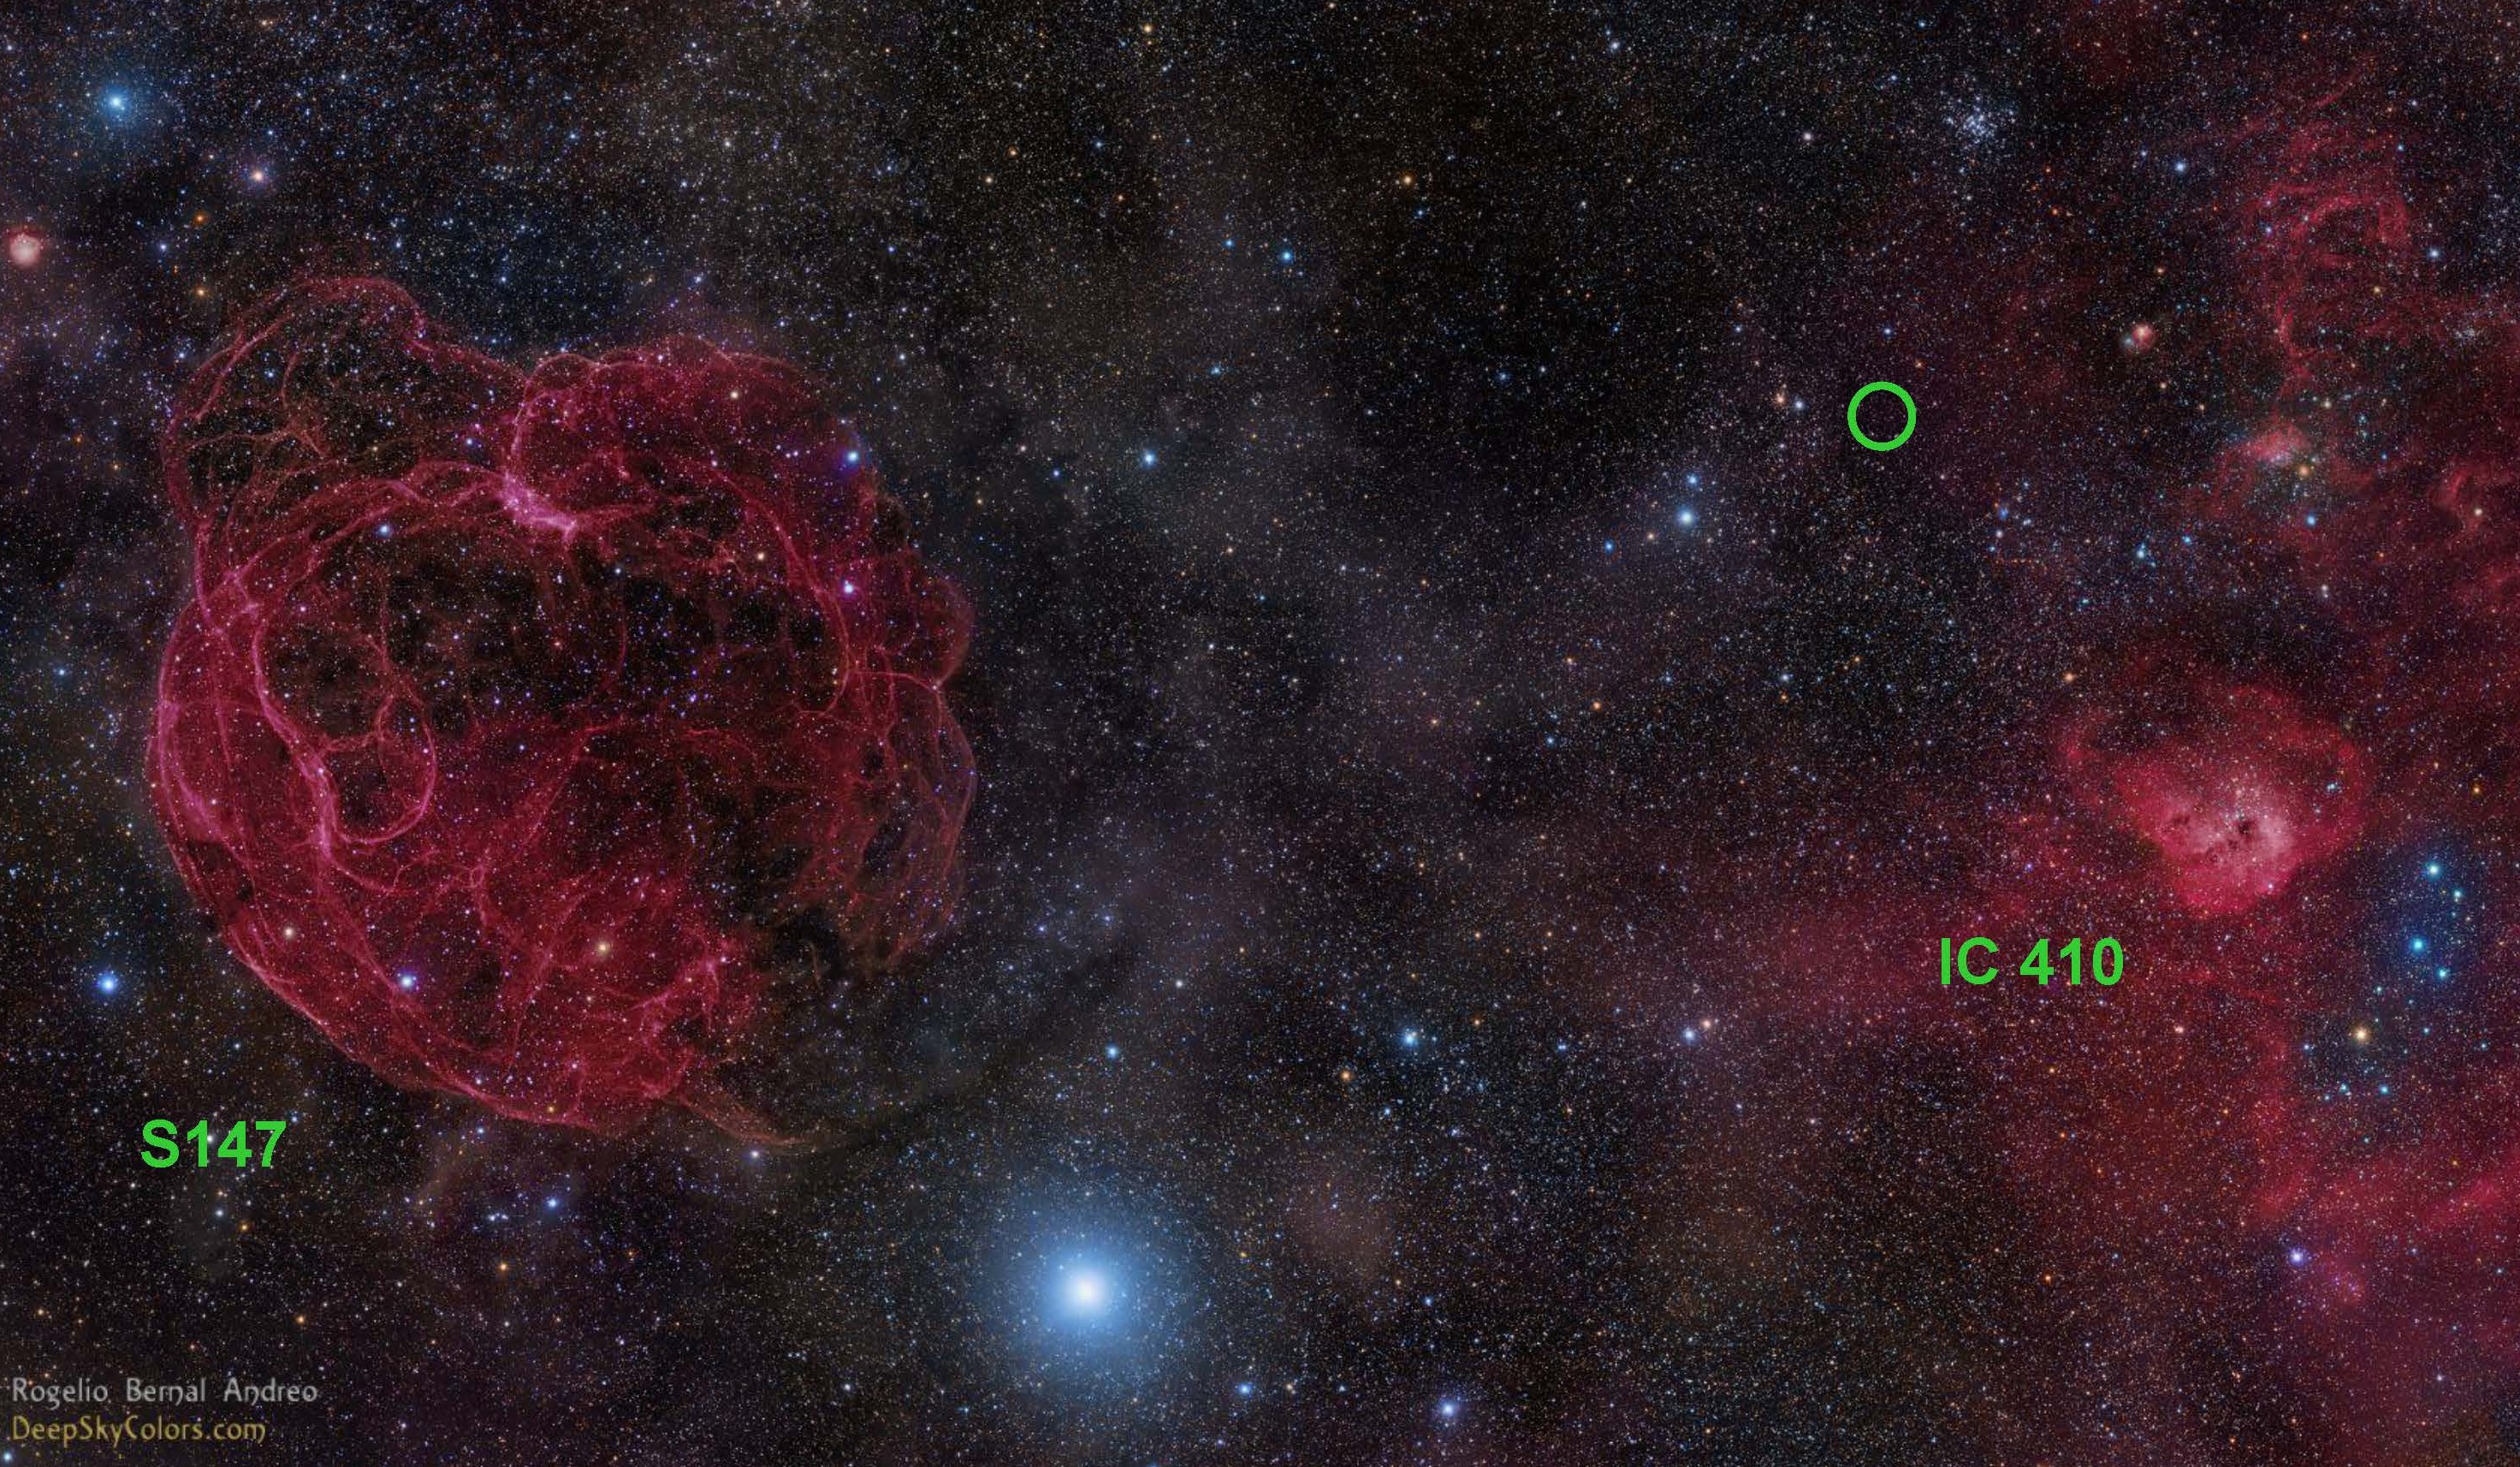 Optical sky image of the area in the constellation Auriga where the fast radio burst FRB 121102 has been detected. The position of the burst, between the old supernova remnant S147 (left) and the star formation region IC 410 (right) is marked with a green circle.